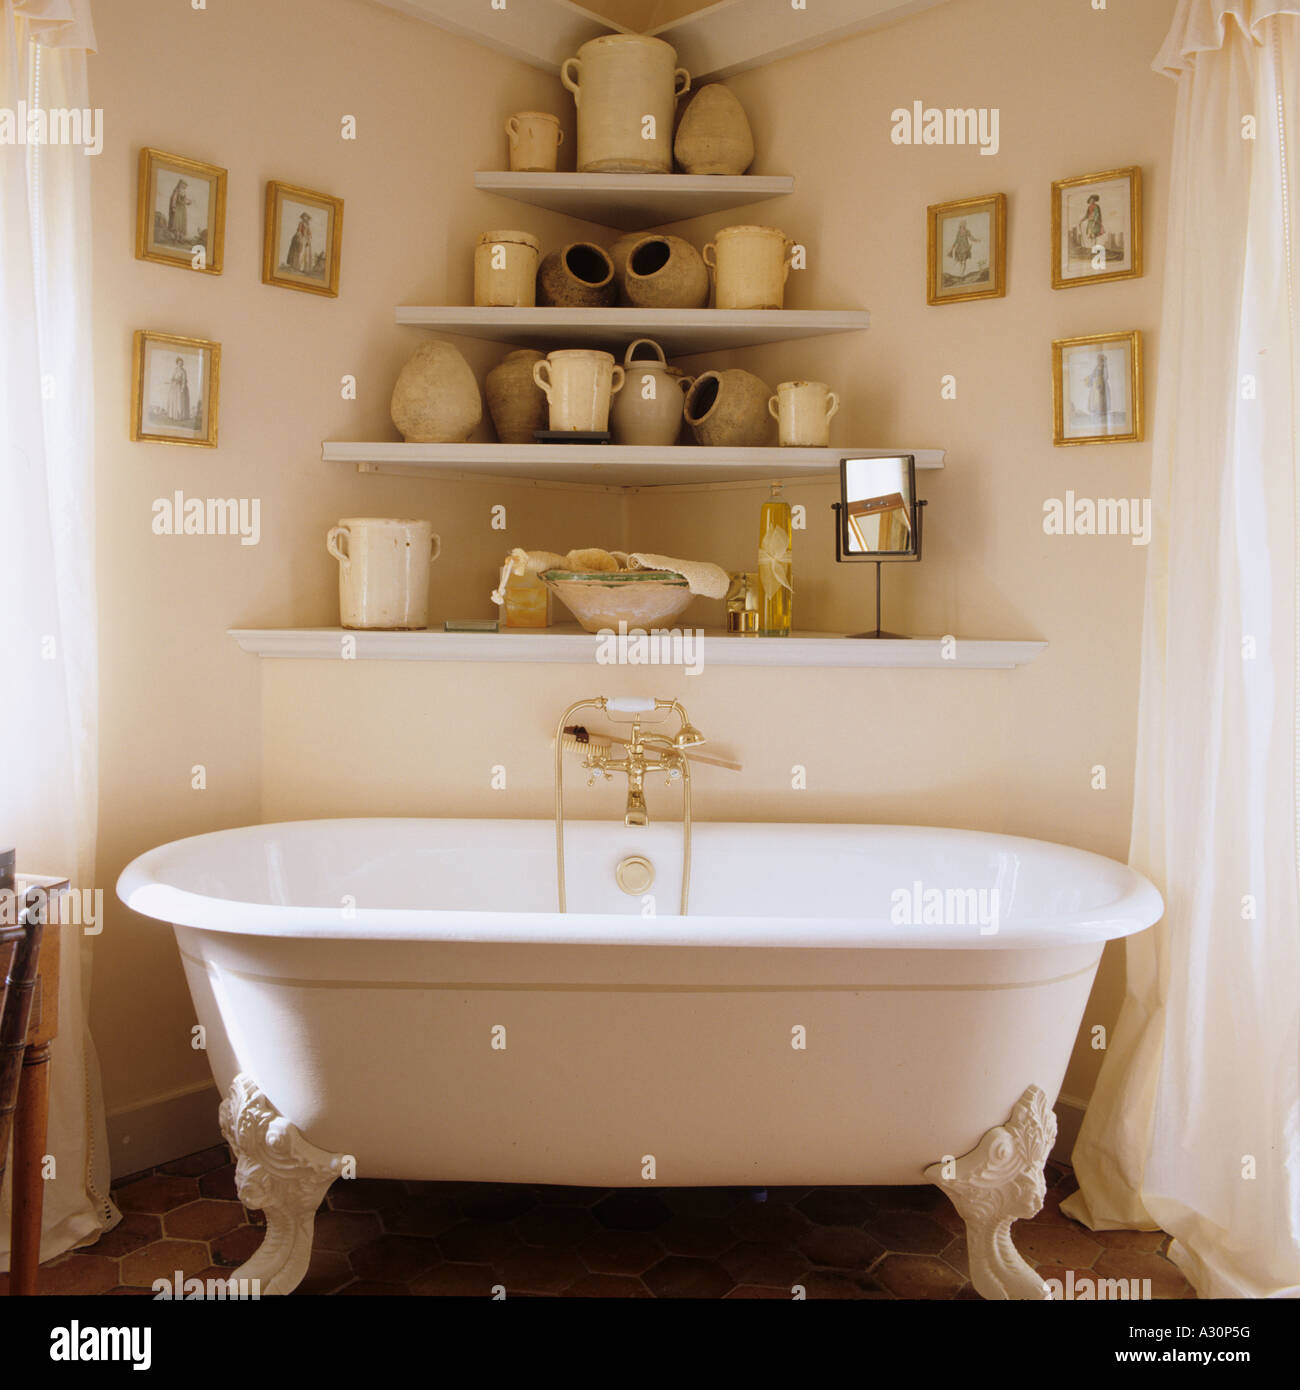 Freestanding bath and shelving with pots Stock Photo